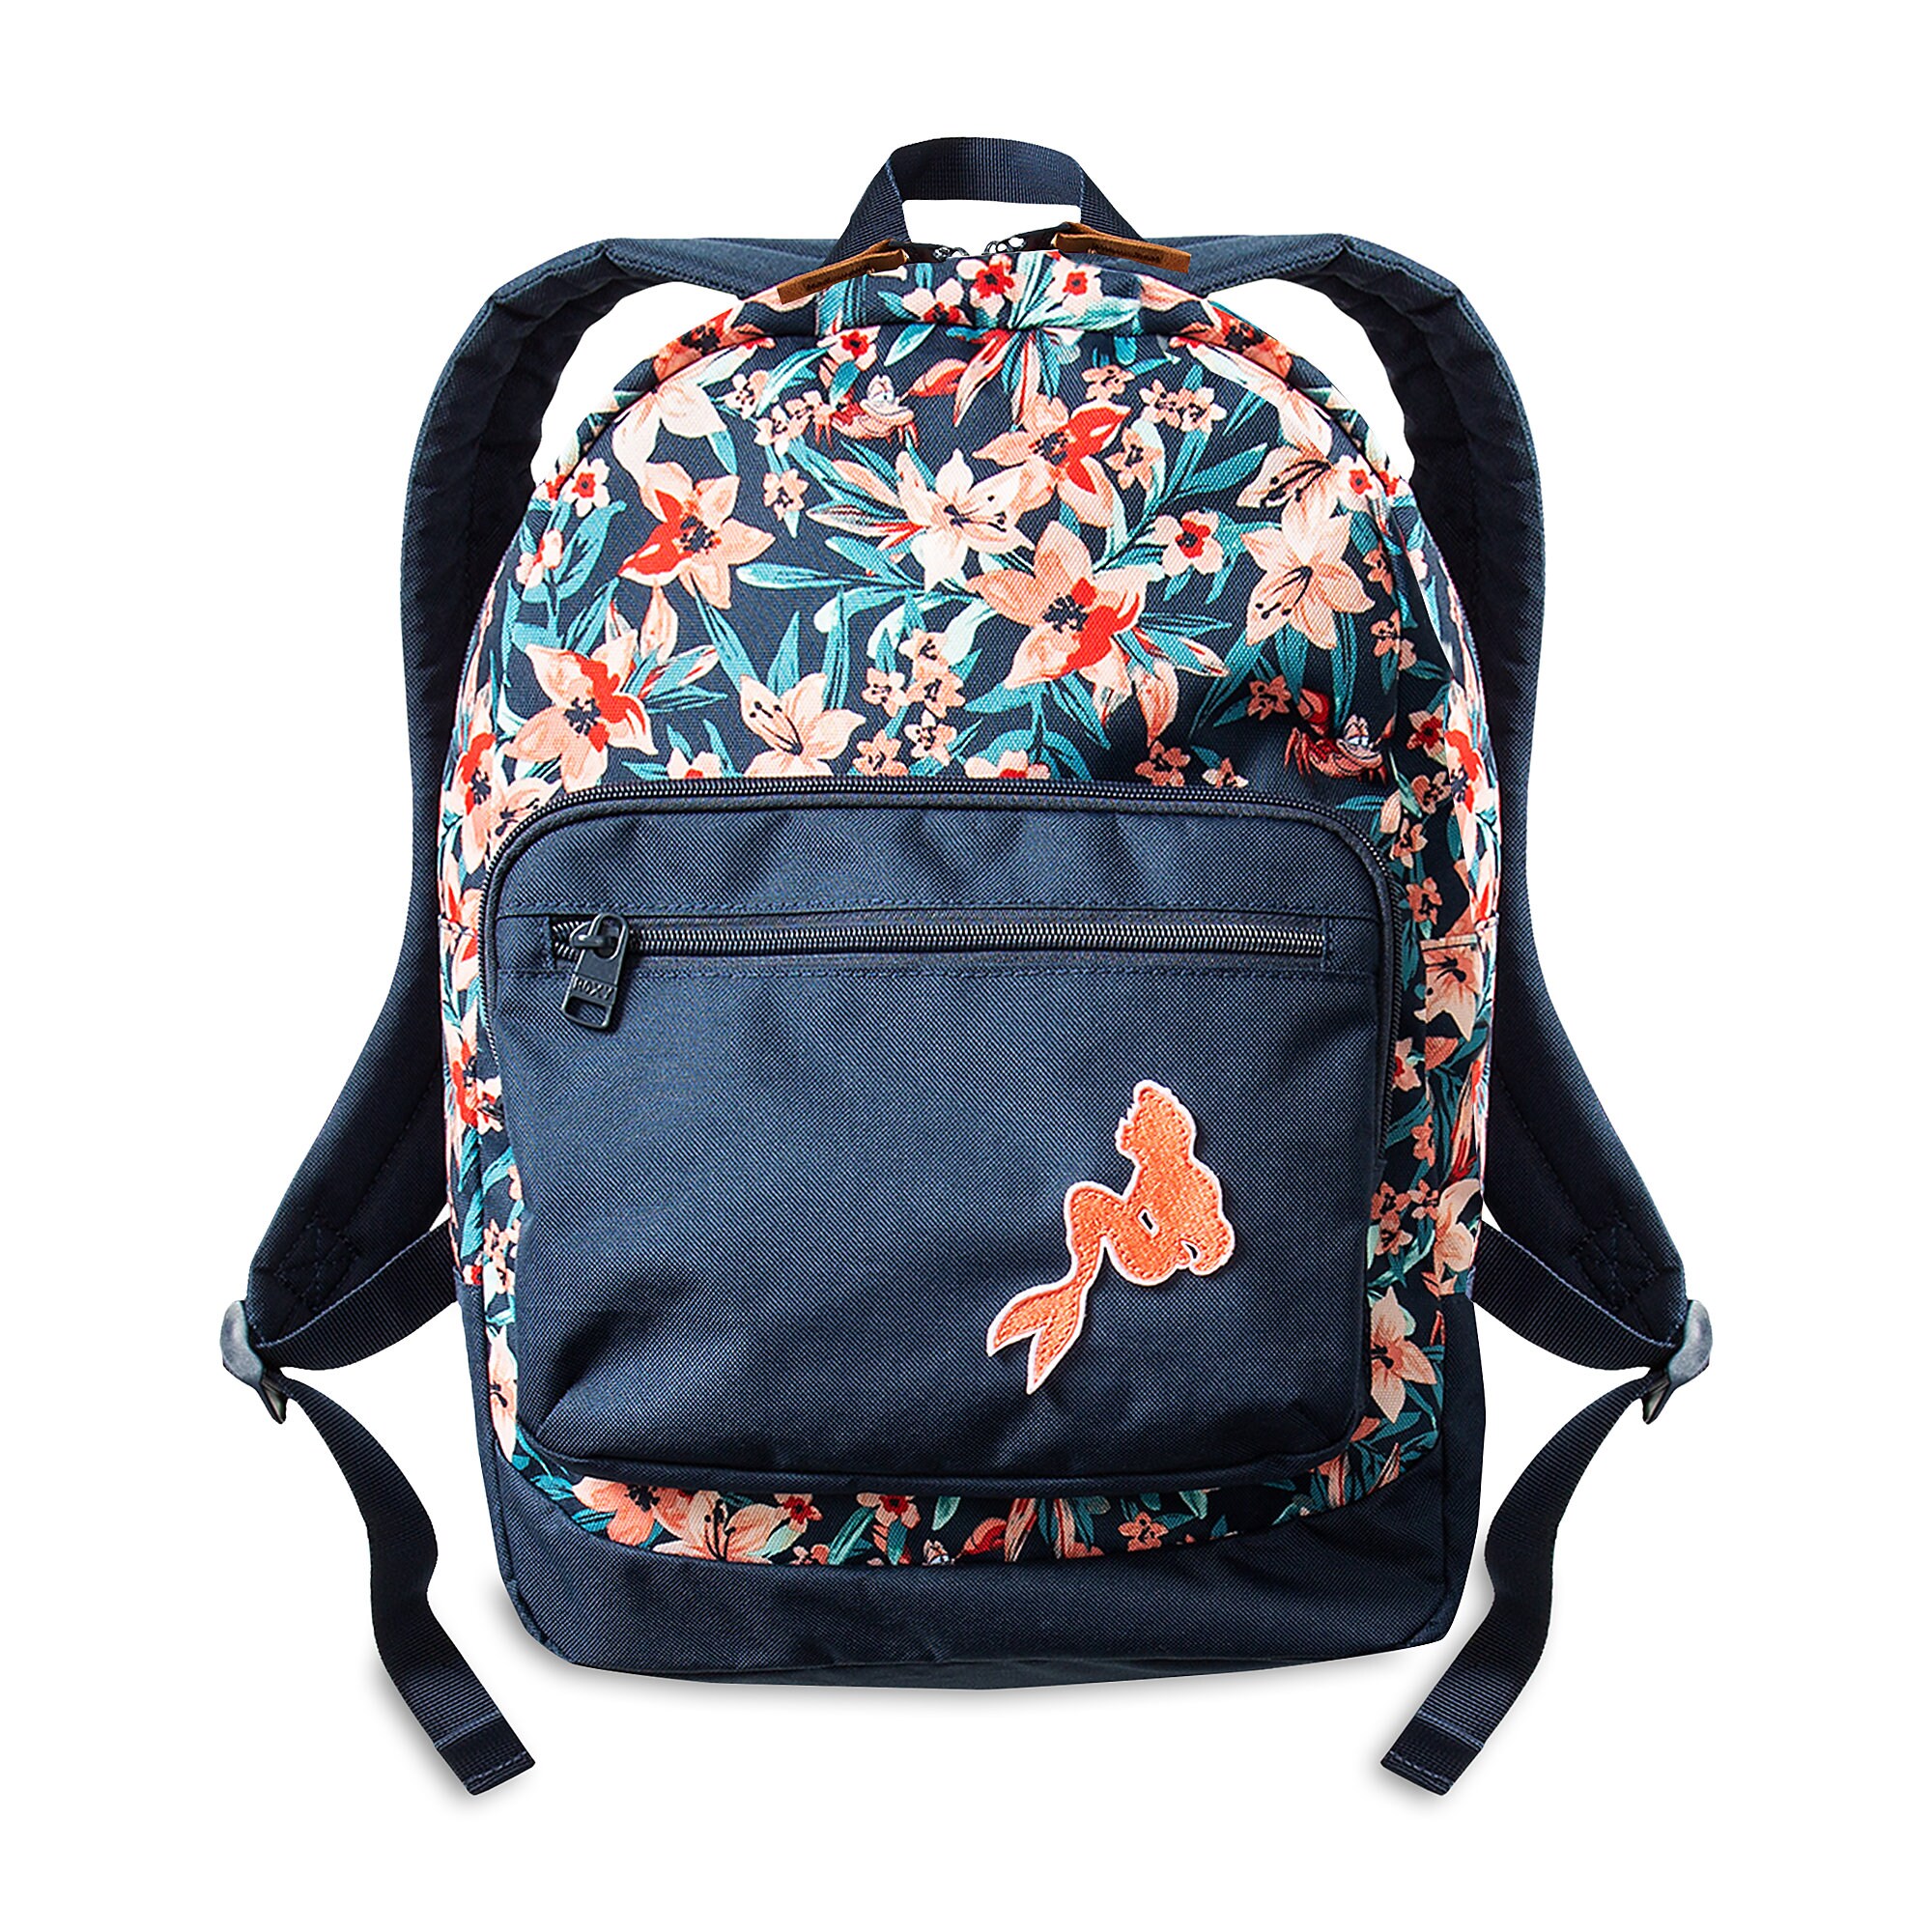 The Little Mermaid Backpack by ROXY Girl available online for purchase